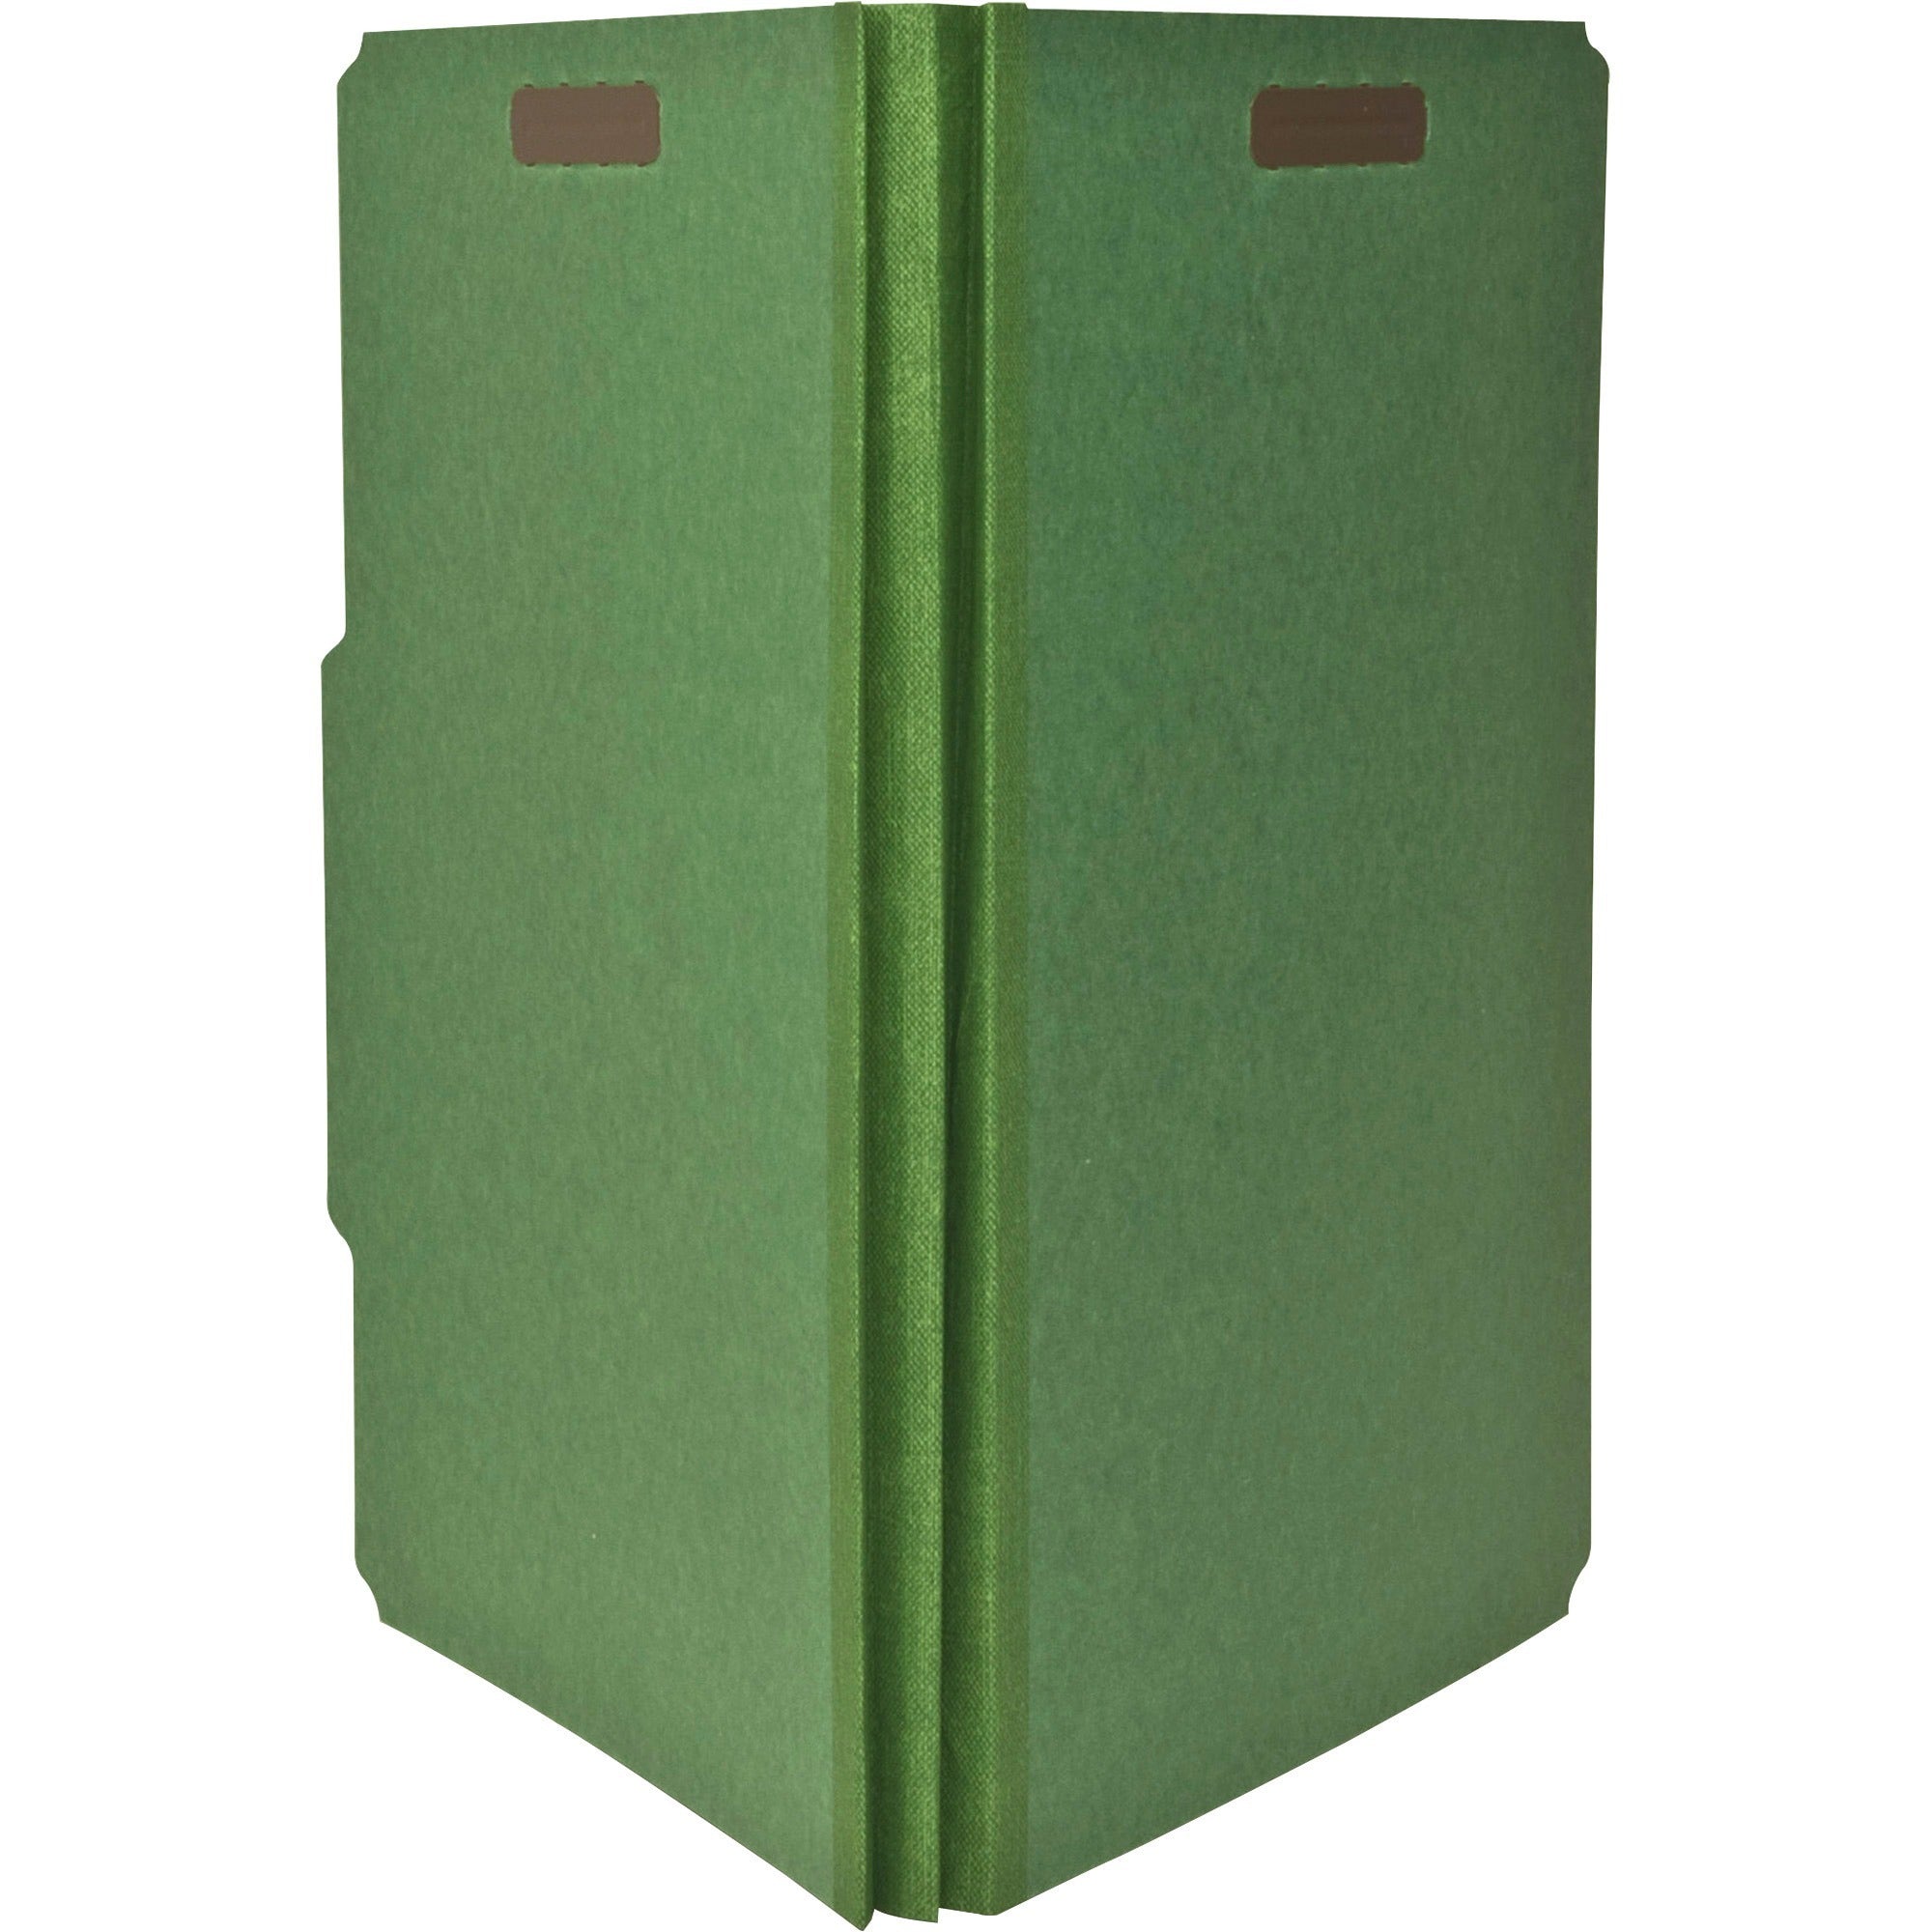 Nature Saver Letter Recycled Classification Folder - 8 1/2" x 11" - 2" Fastener Capacity for Folder - Top Tab Location - 1 Divider(s) - Green - 100% Recycled - 10 / Box - 